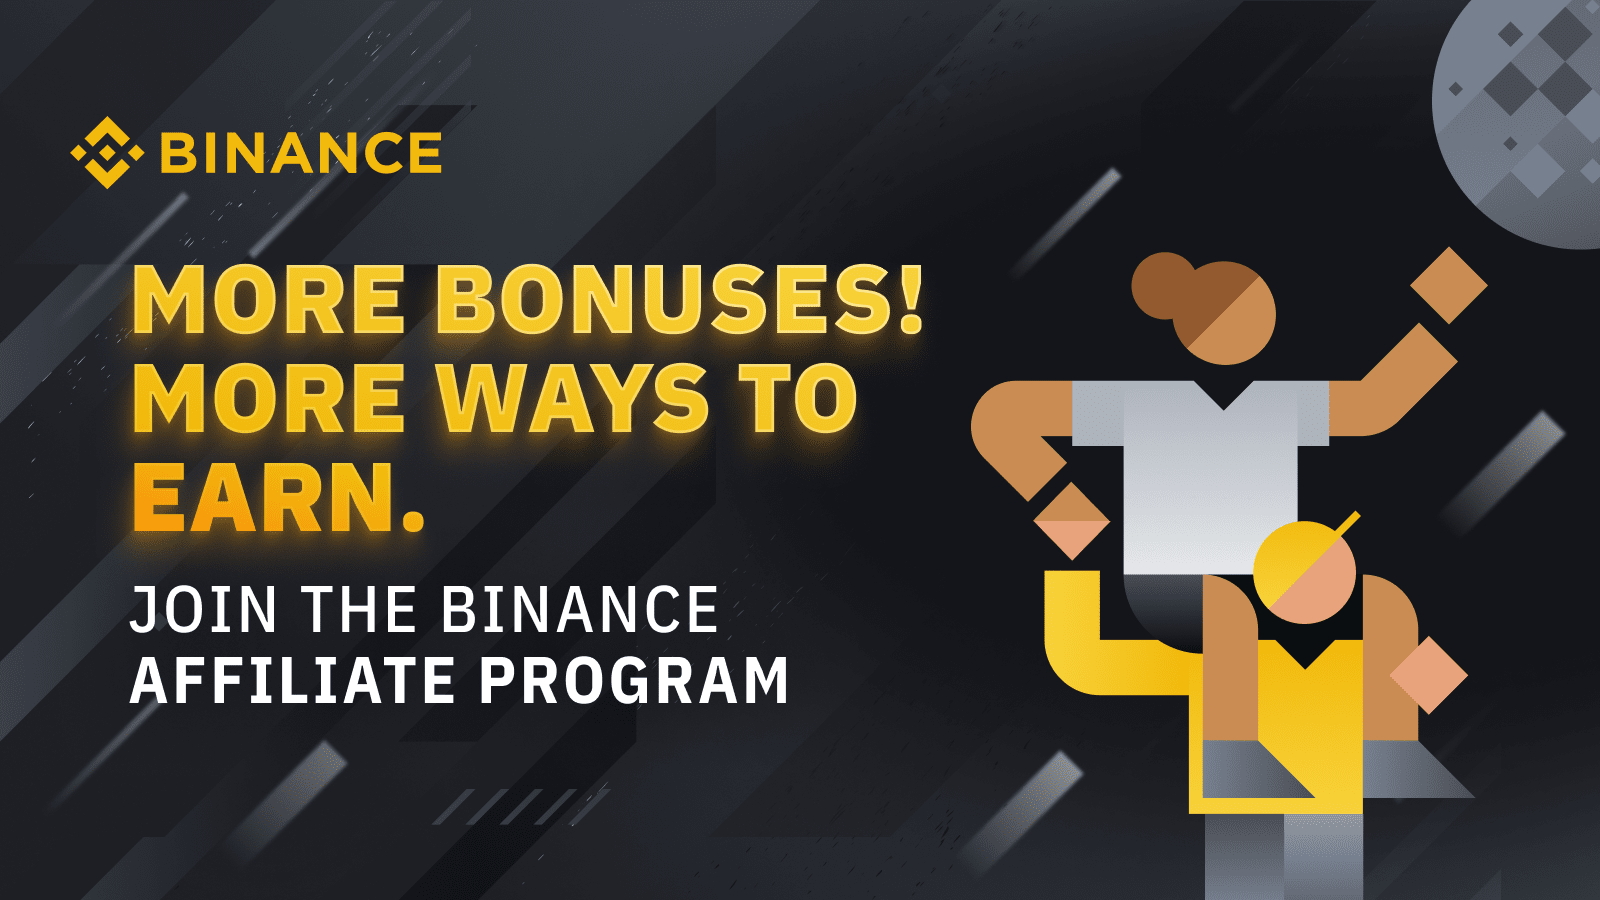 Introducing the Binance Futures Referral Code – Gateway to the Crypto Universe